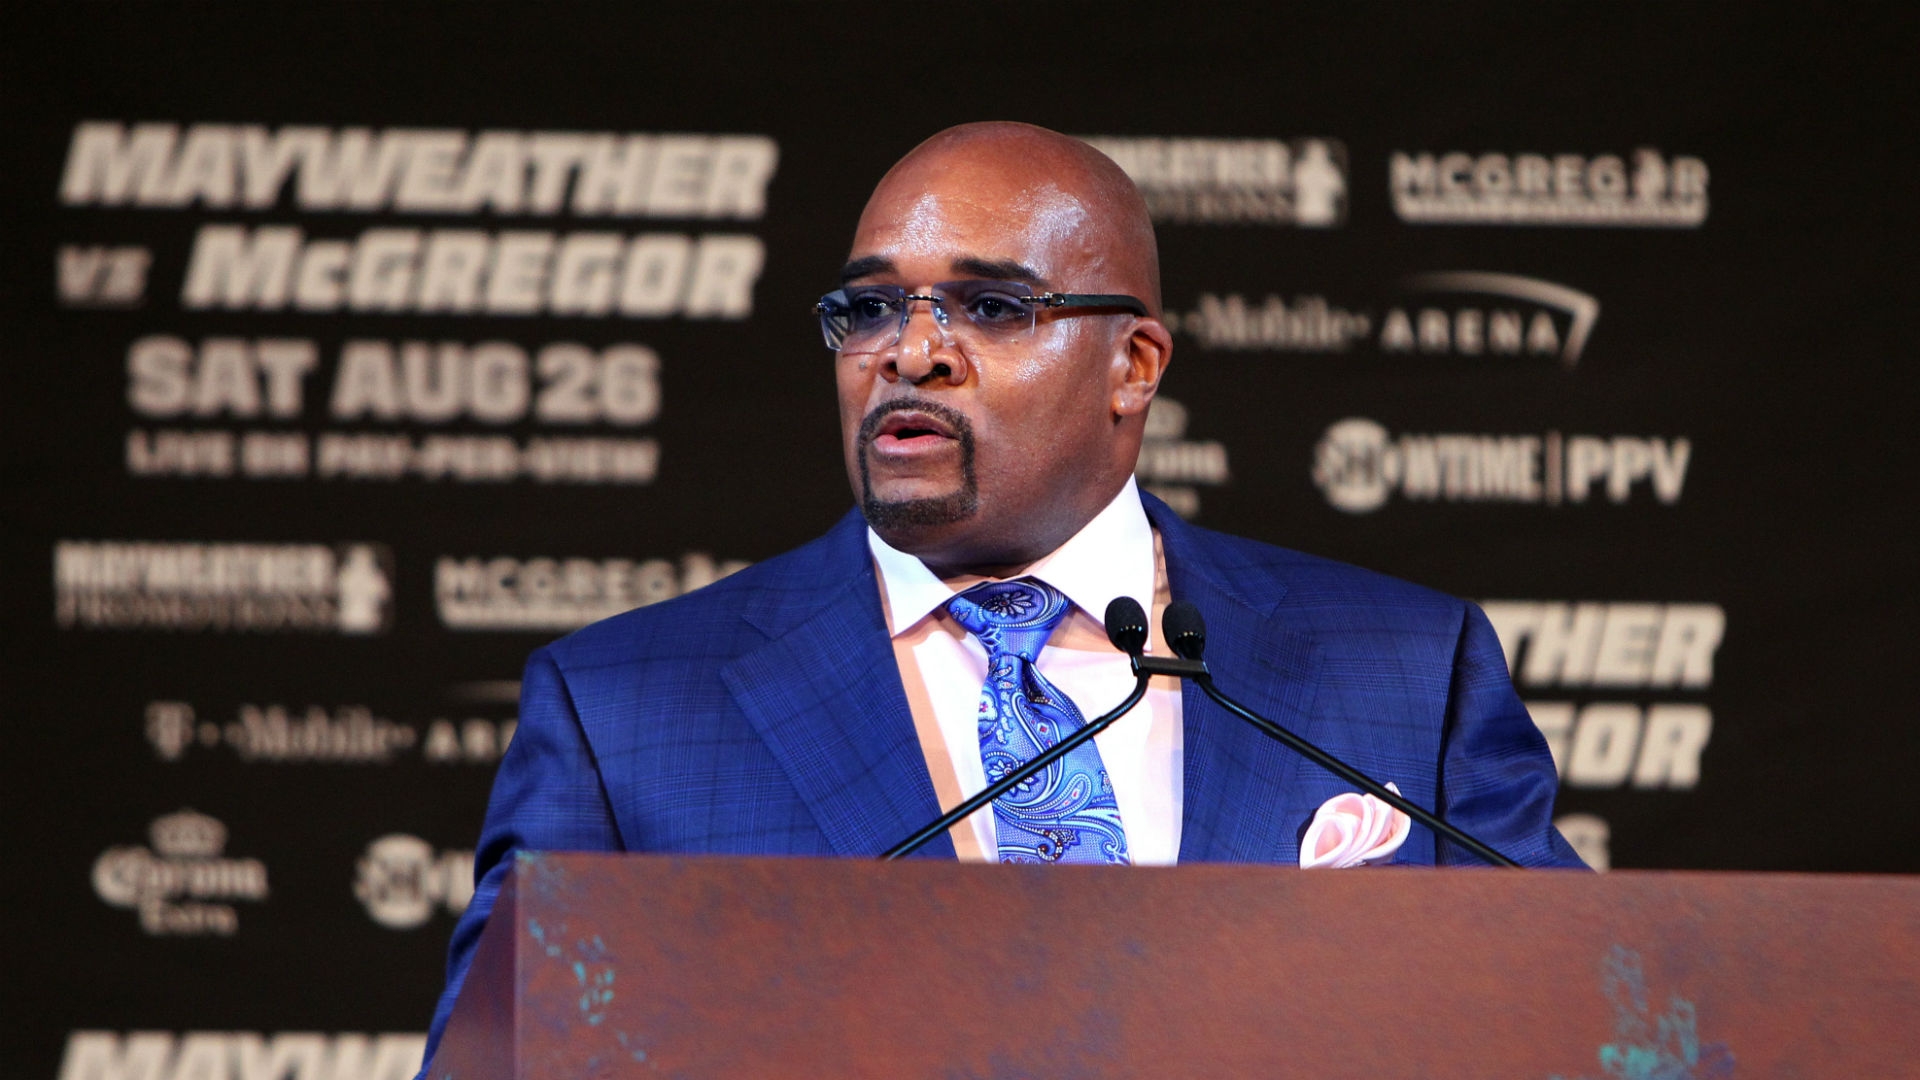 Leonard Ellerbe has reportedly stepped down as Mayweather Promotions CEO